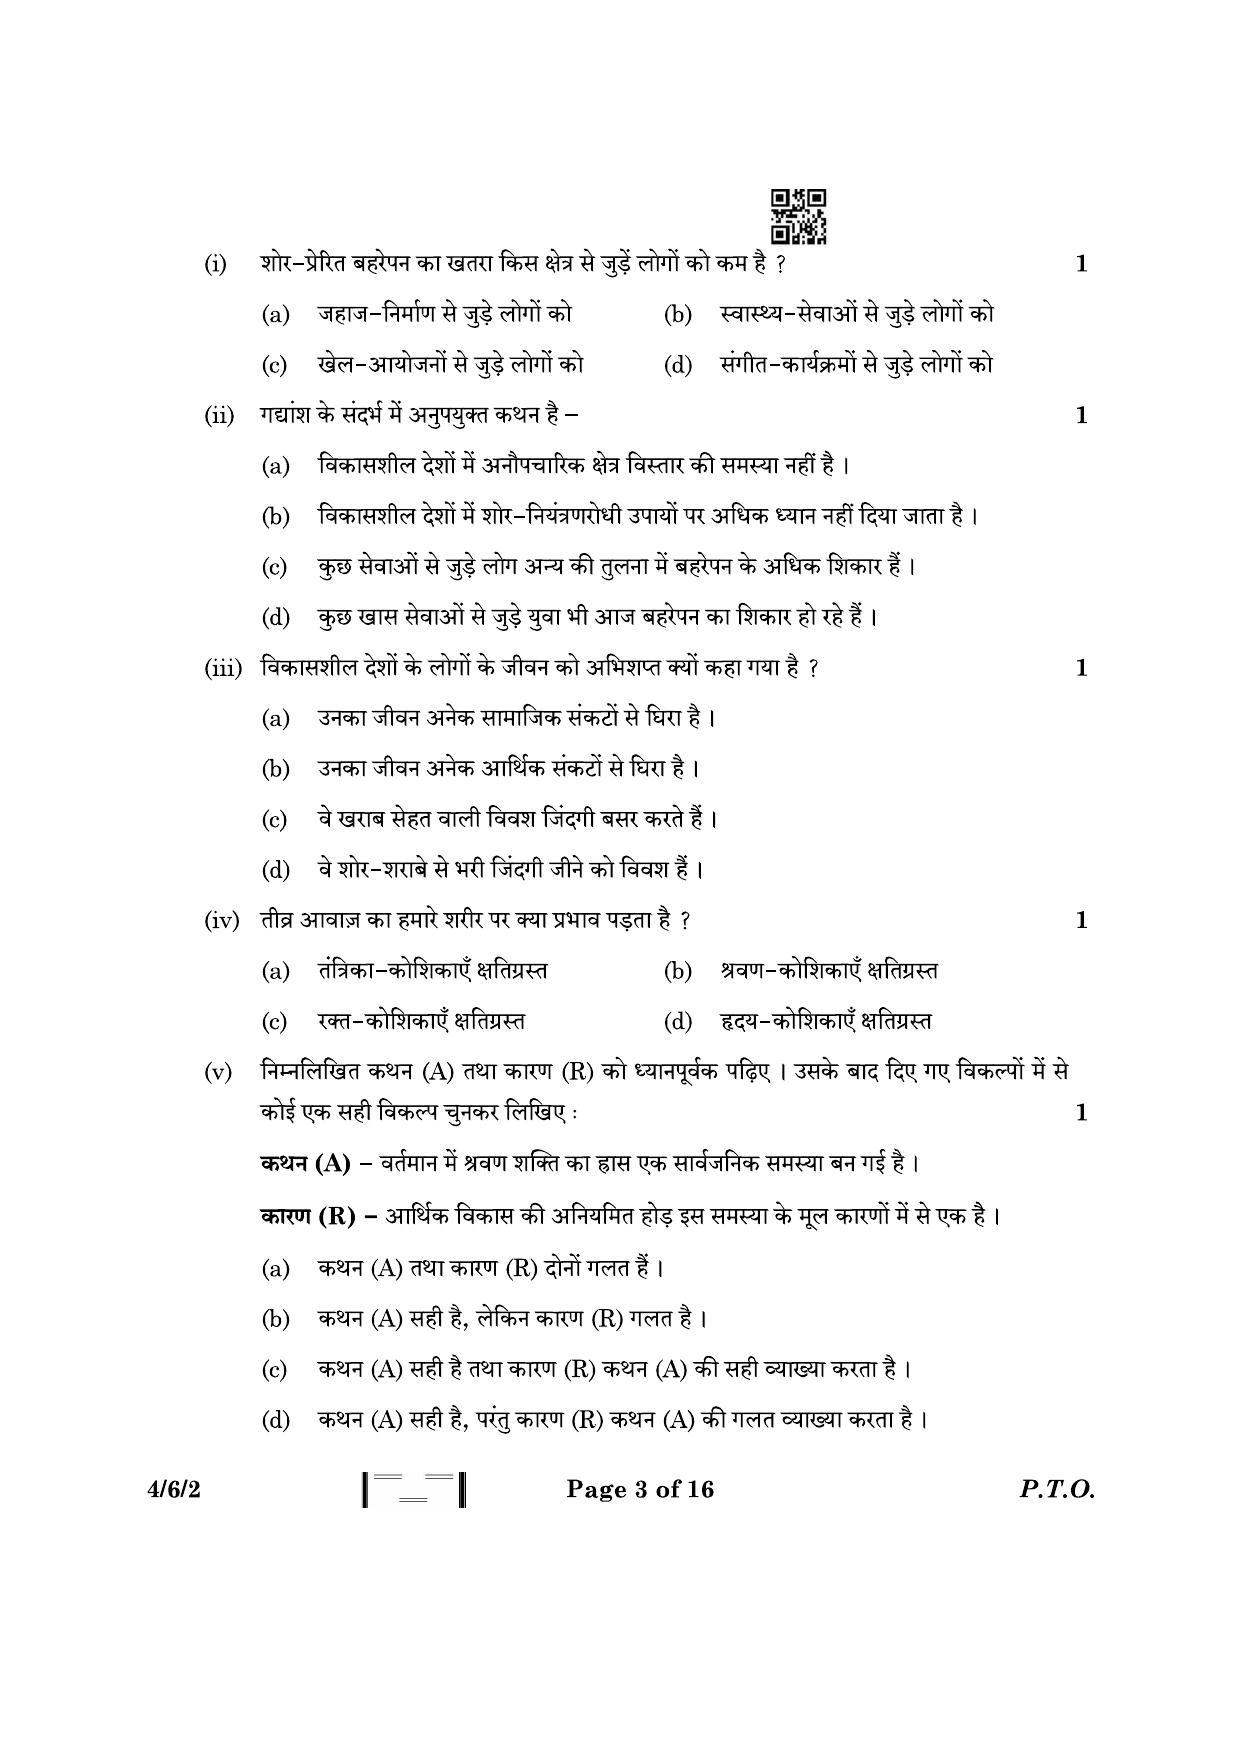 CBSE Class 10 4-6-2 Hindi B 2023 Question Paper - Page 3